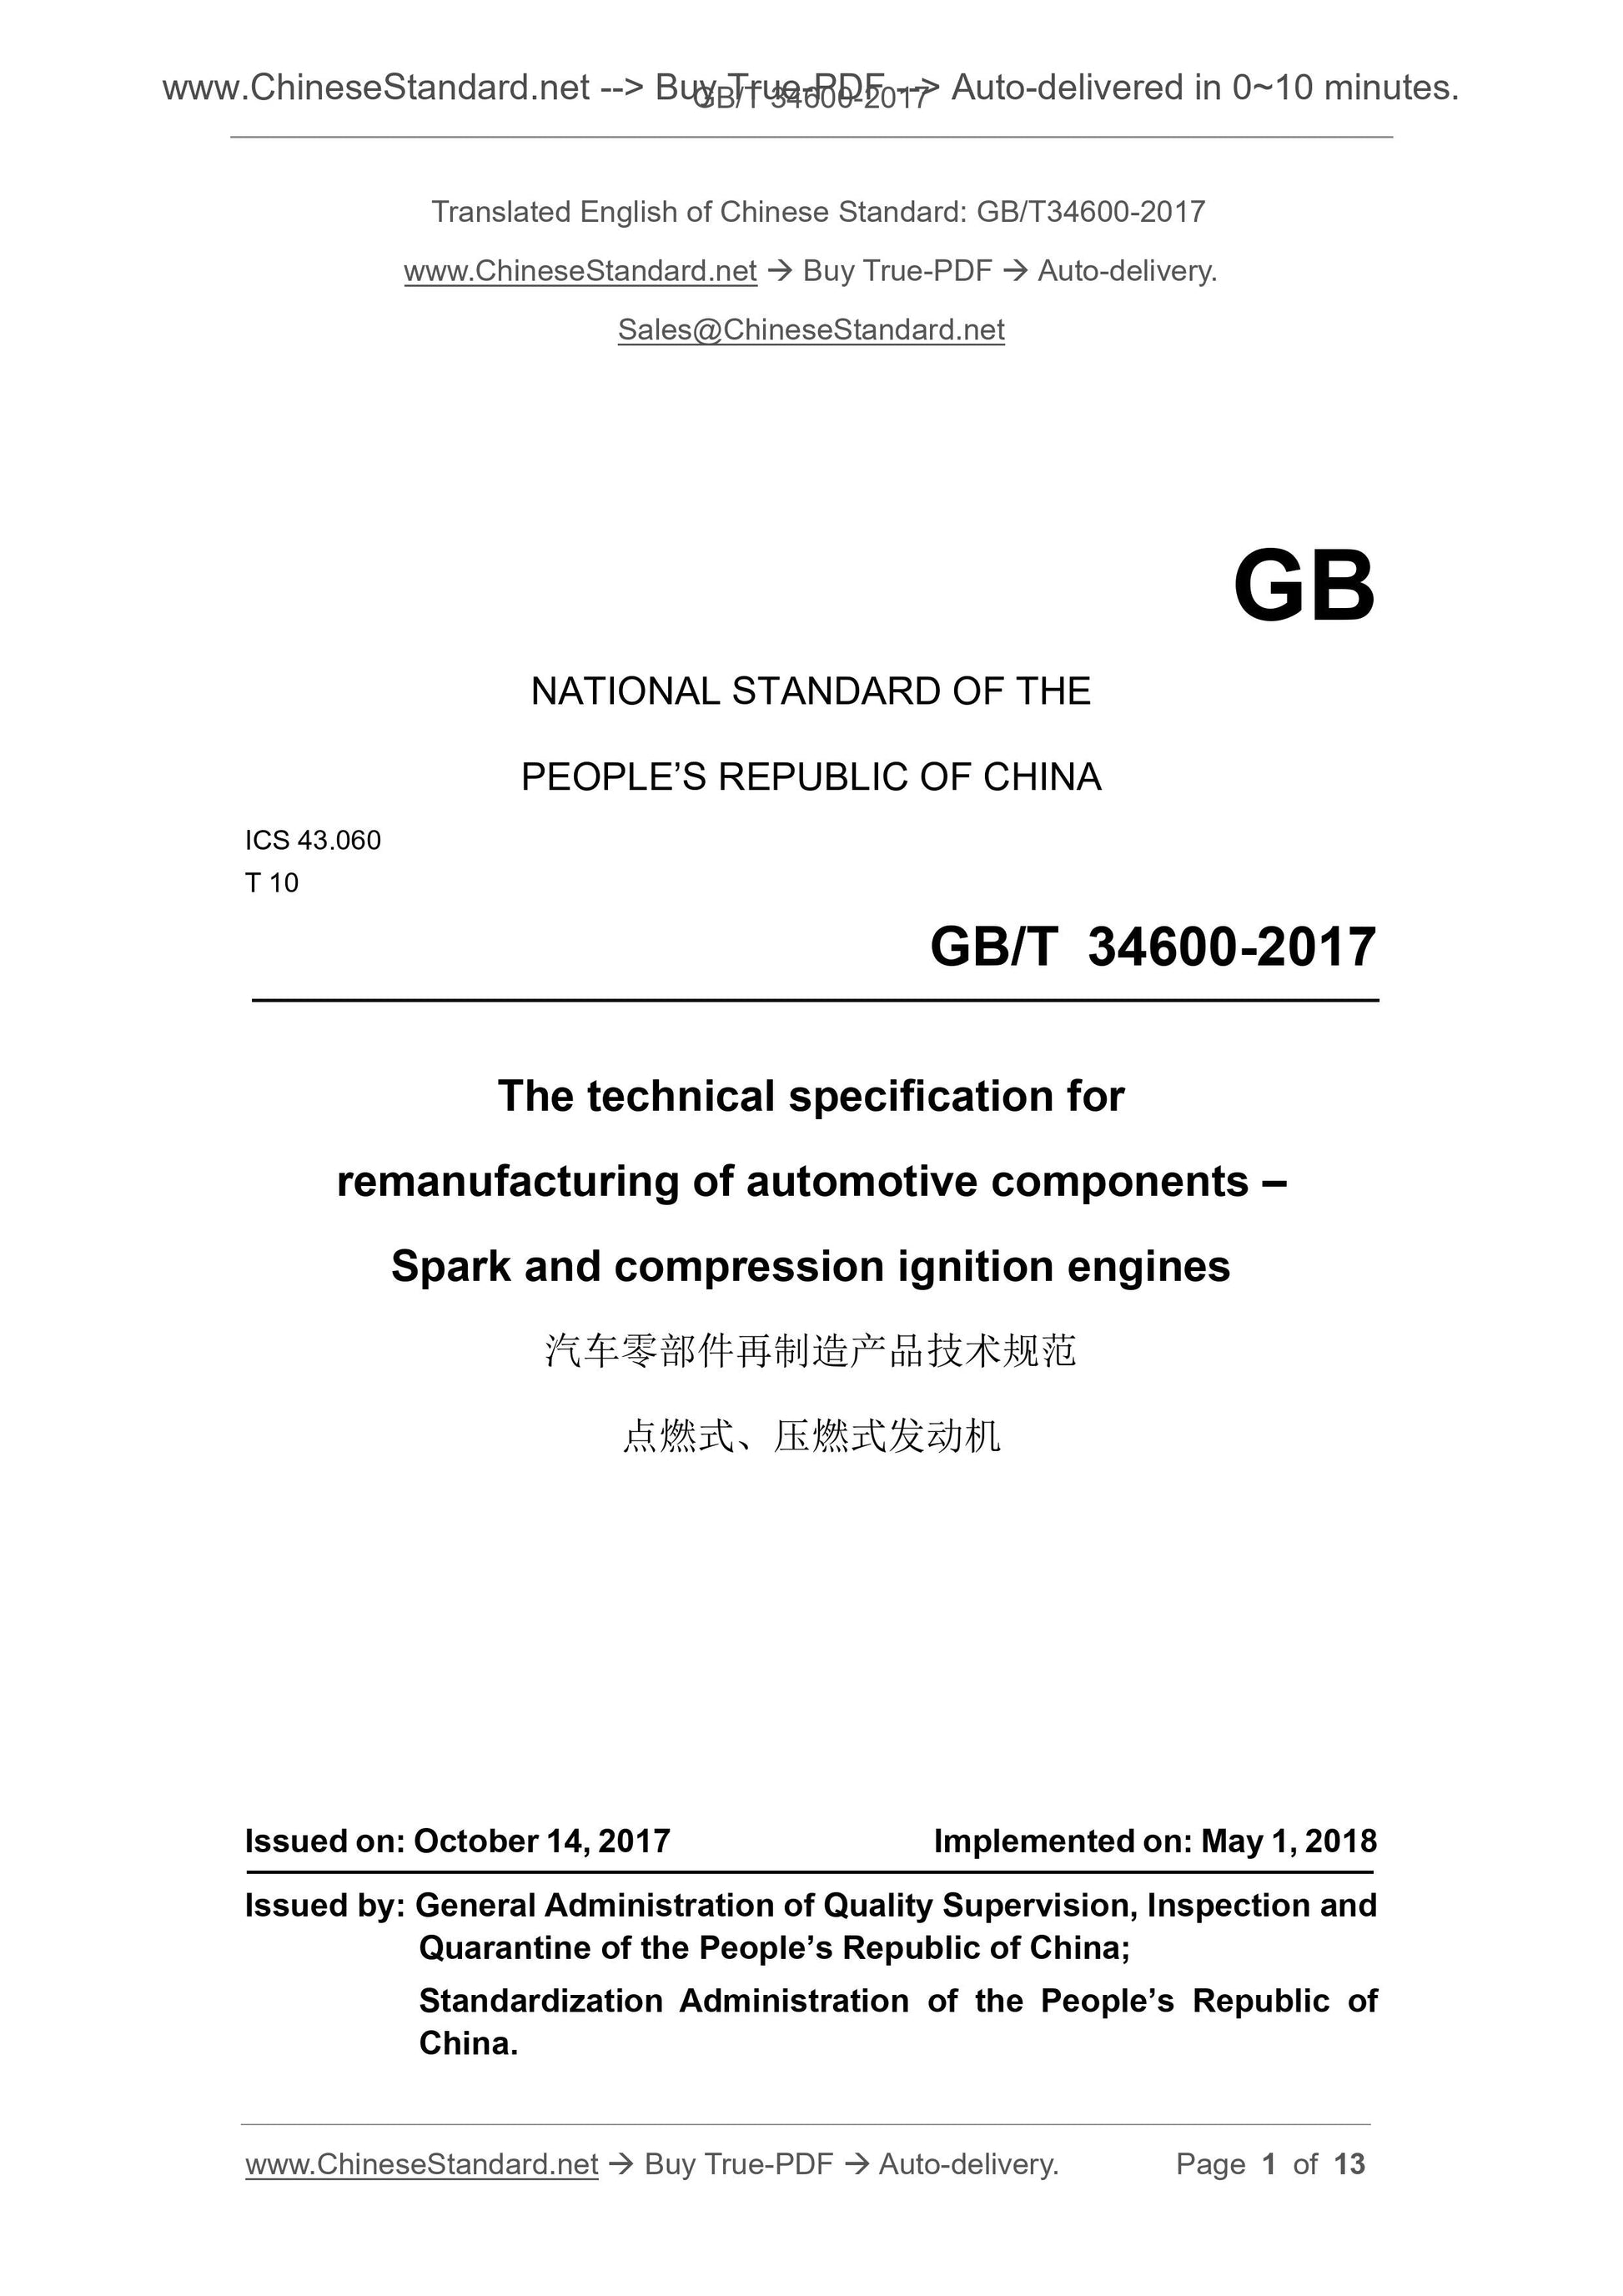 GB/T 34600-2017 Page 1